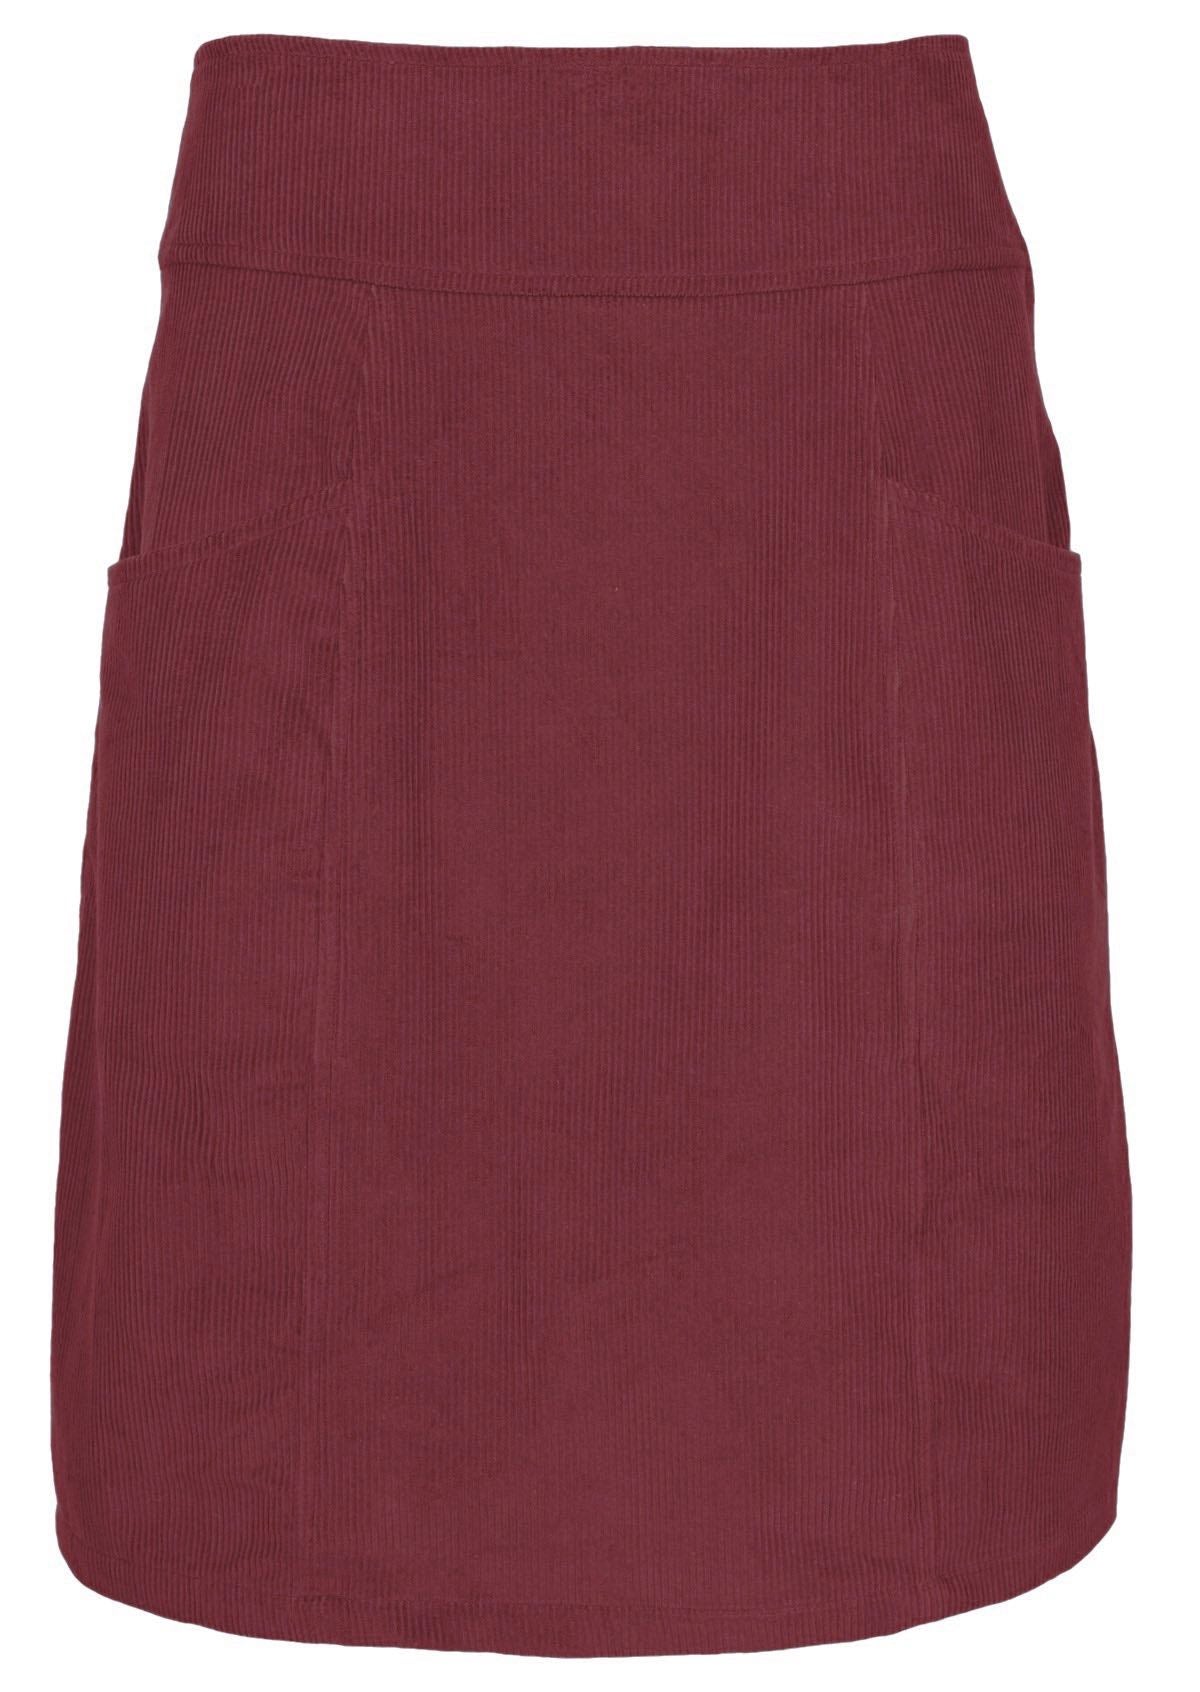 Deep red coloured 100% cotton corduroy skirt features front pockets. 